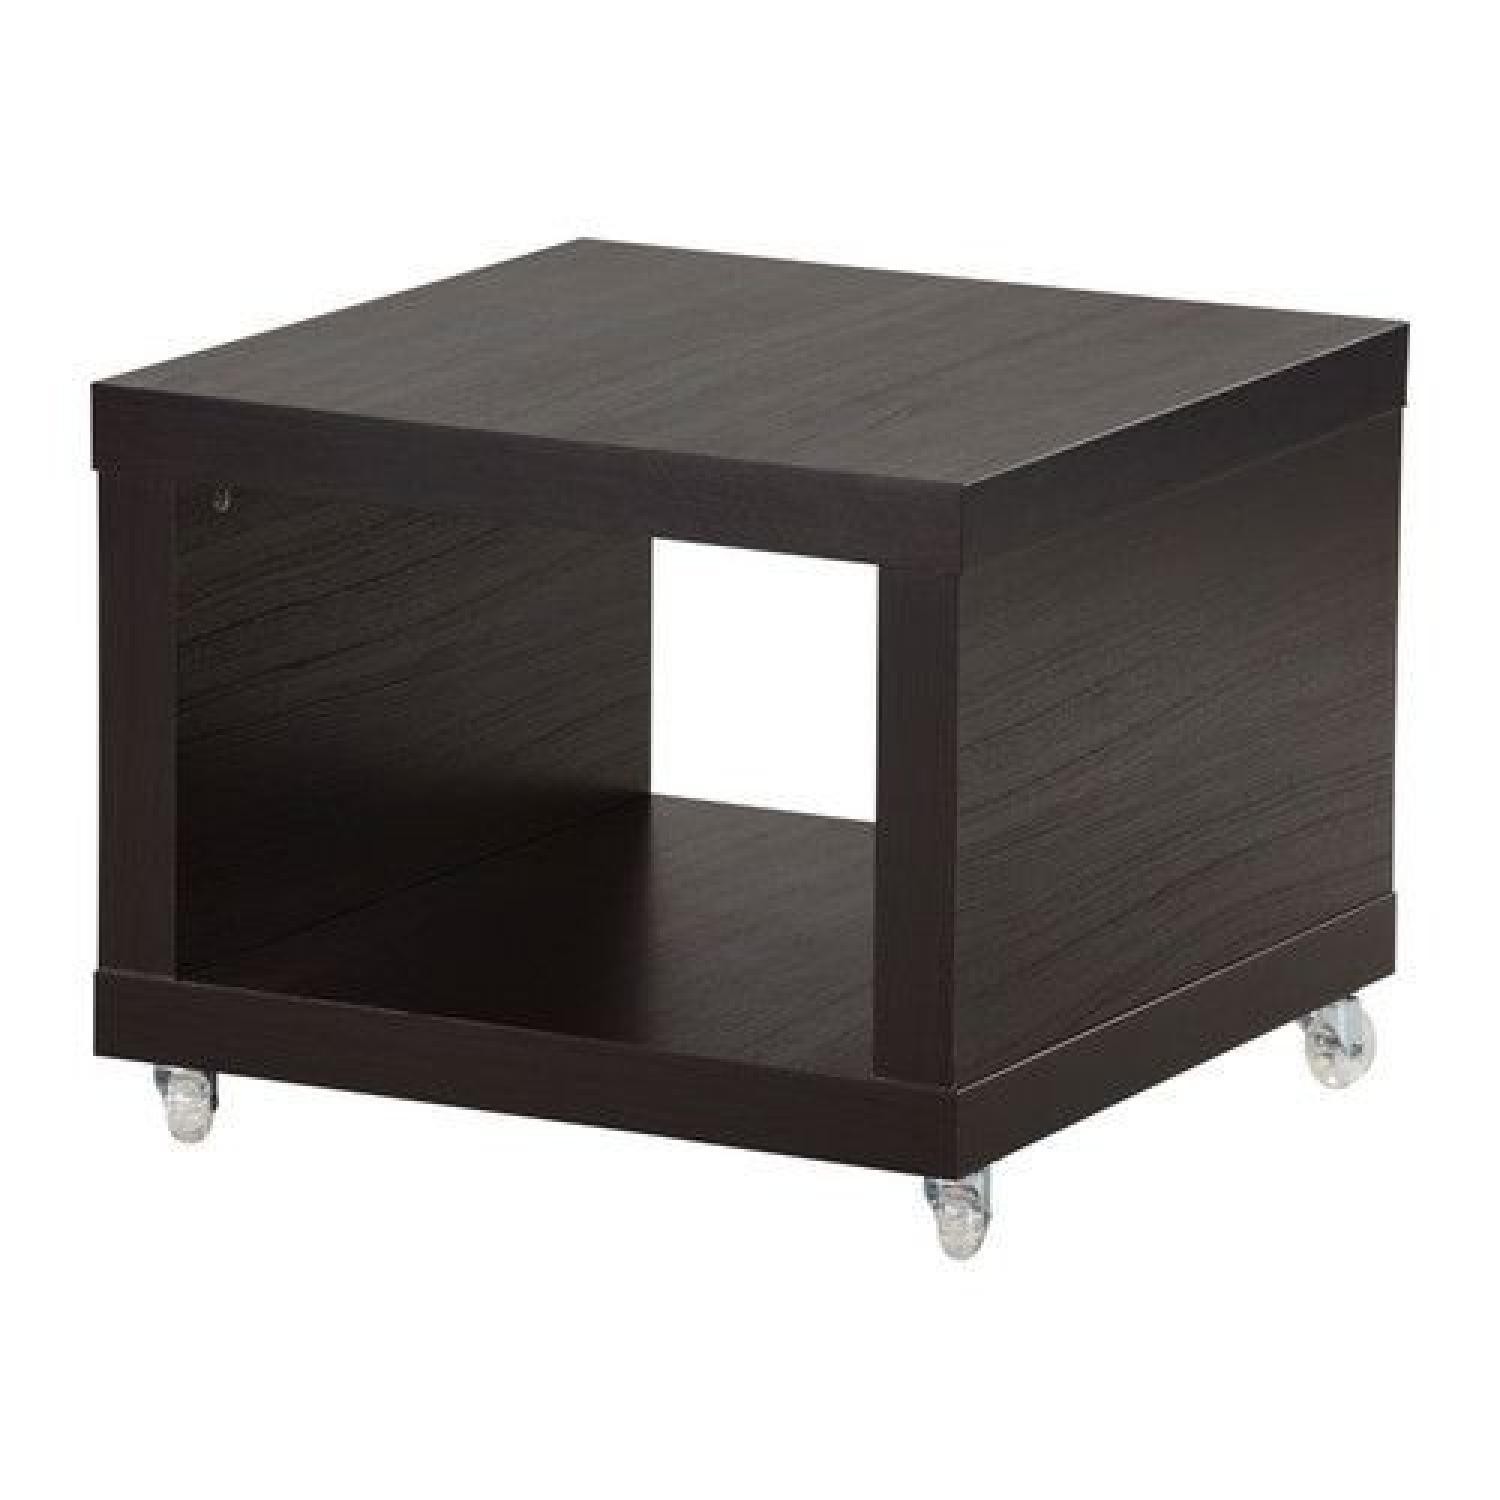 IKEA - LACK Side table on casters, black-brown